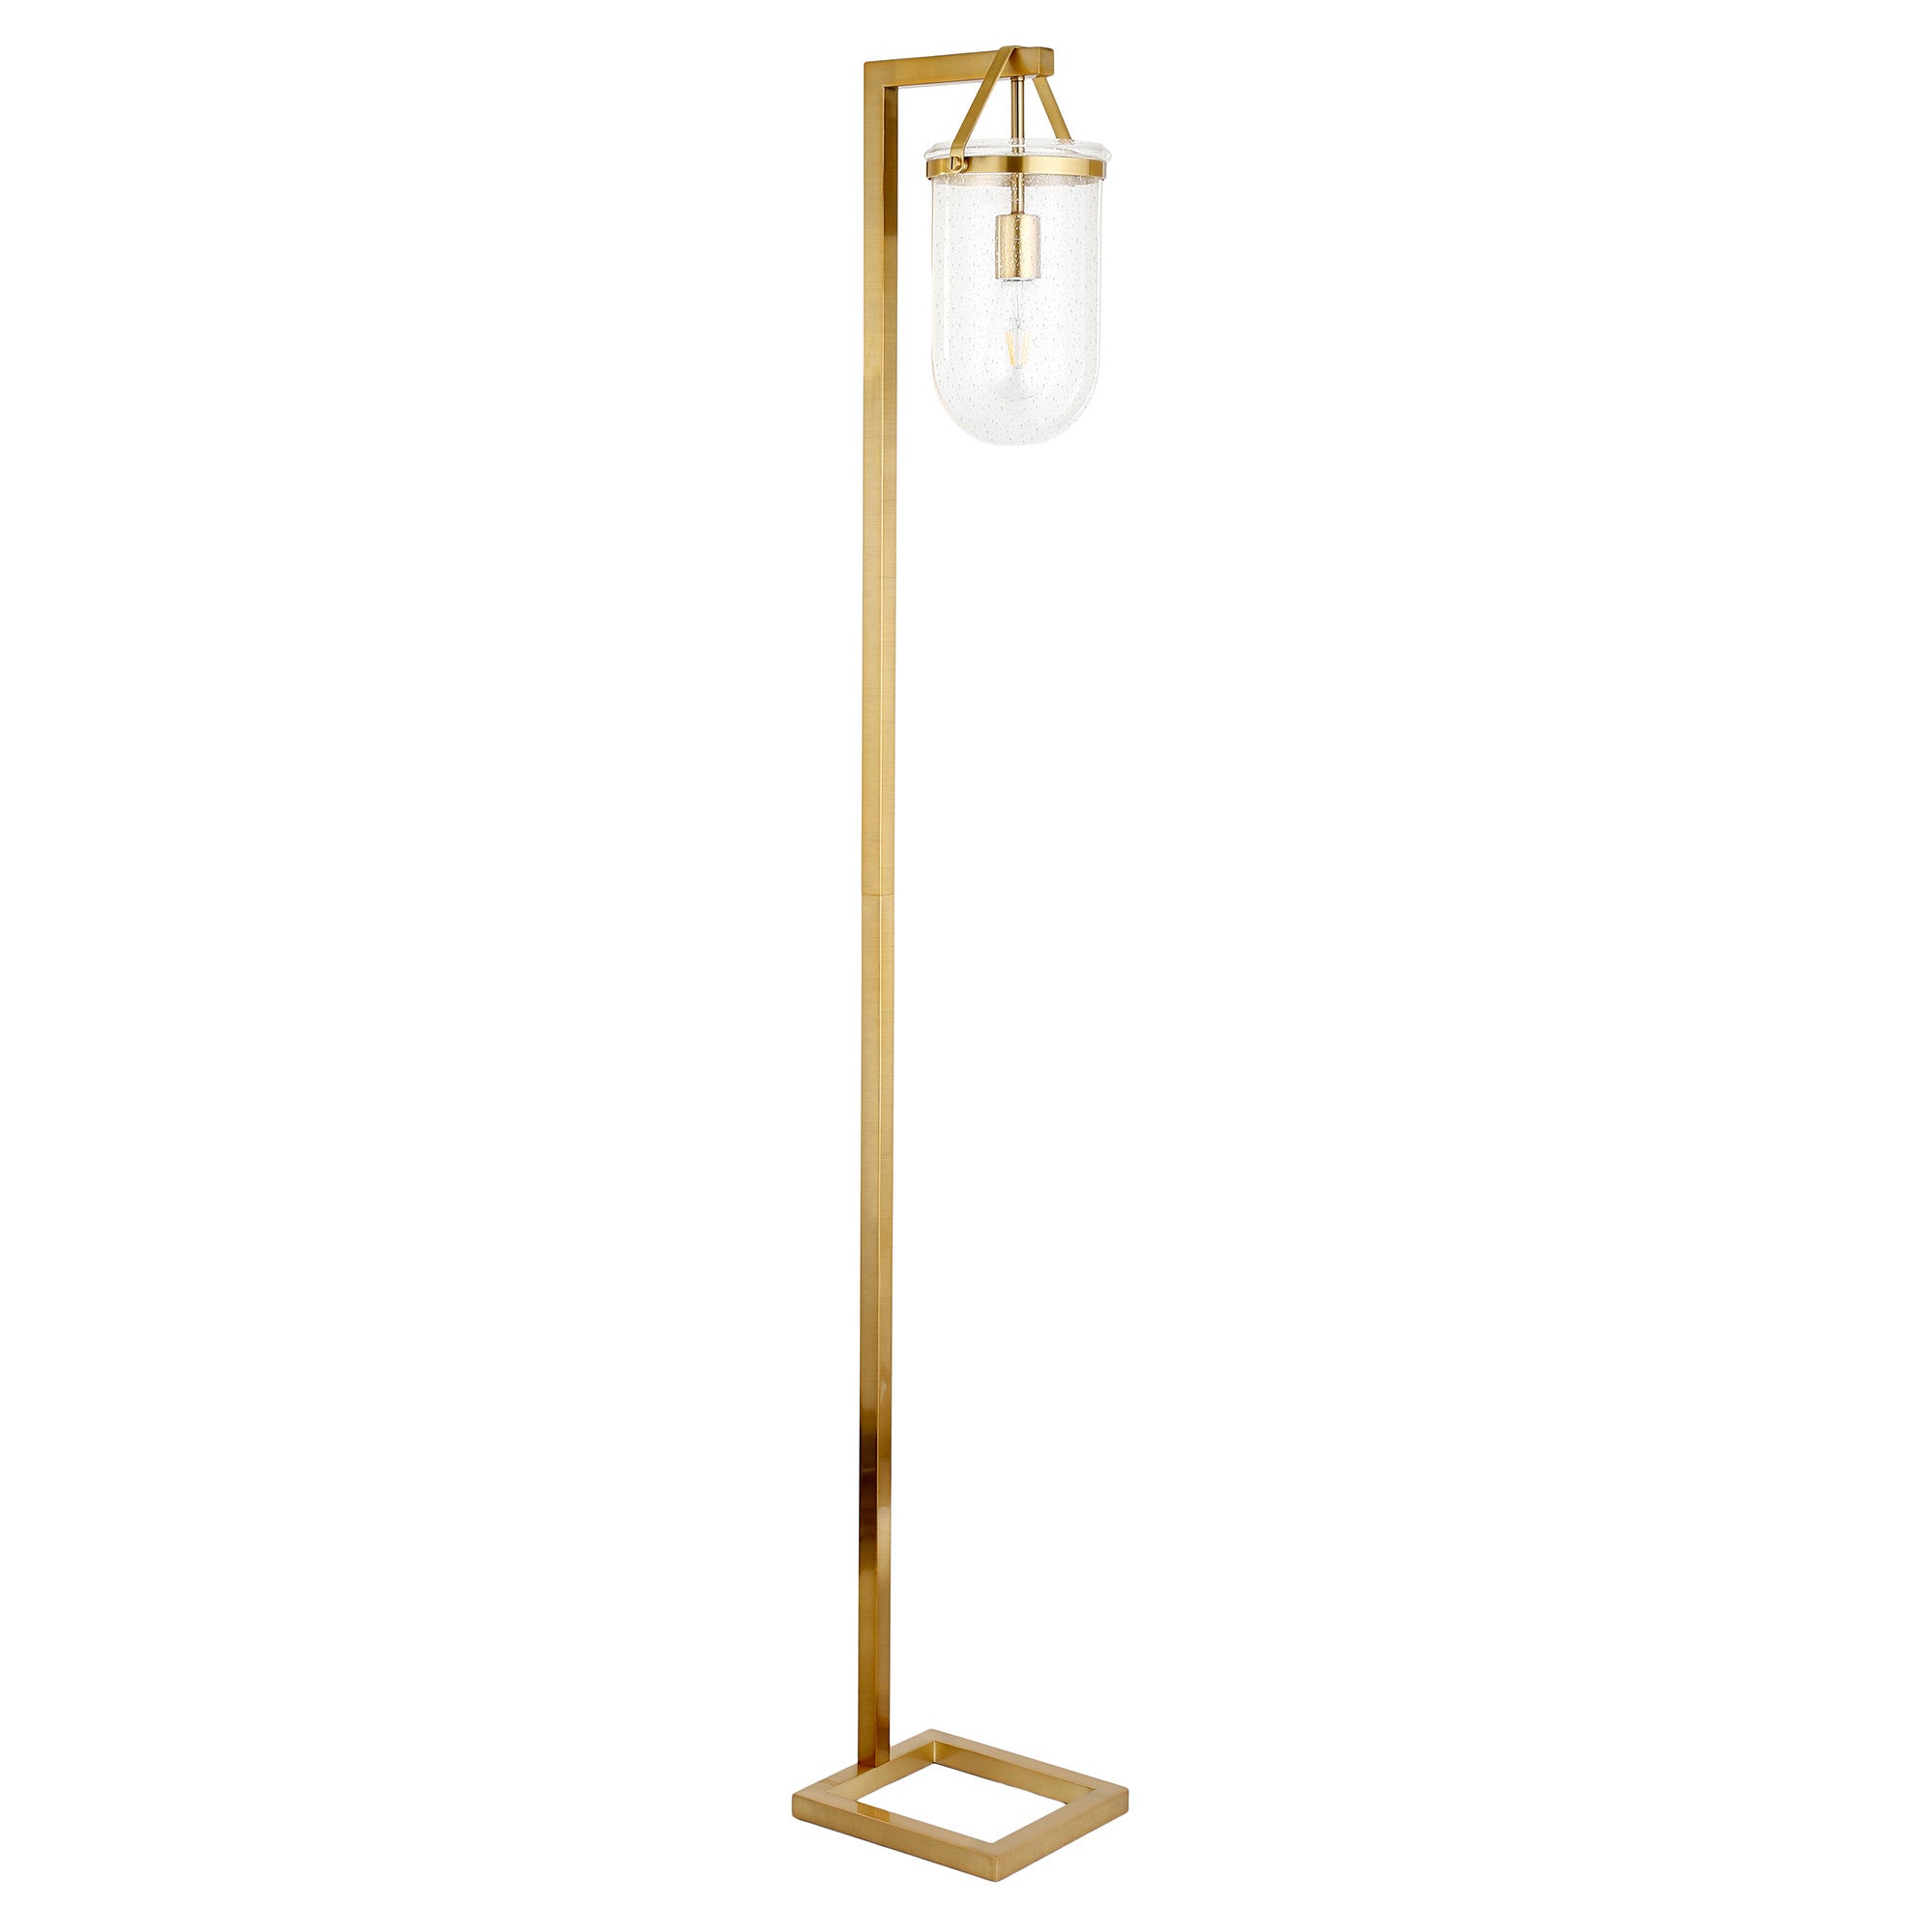 68" Brass Arched Floor Lamp With Clear Seeded Glass Dome Shade